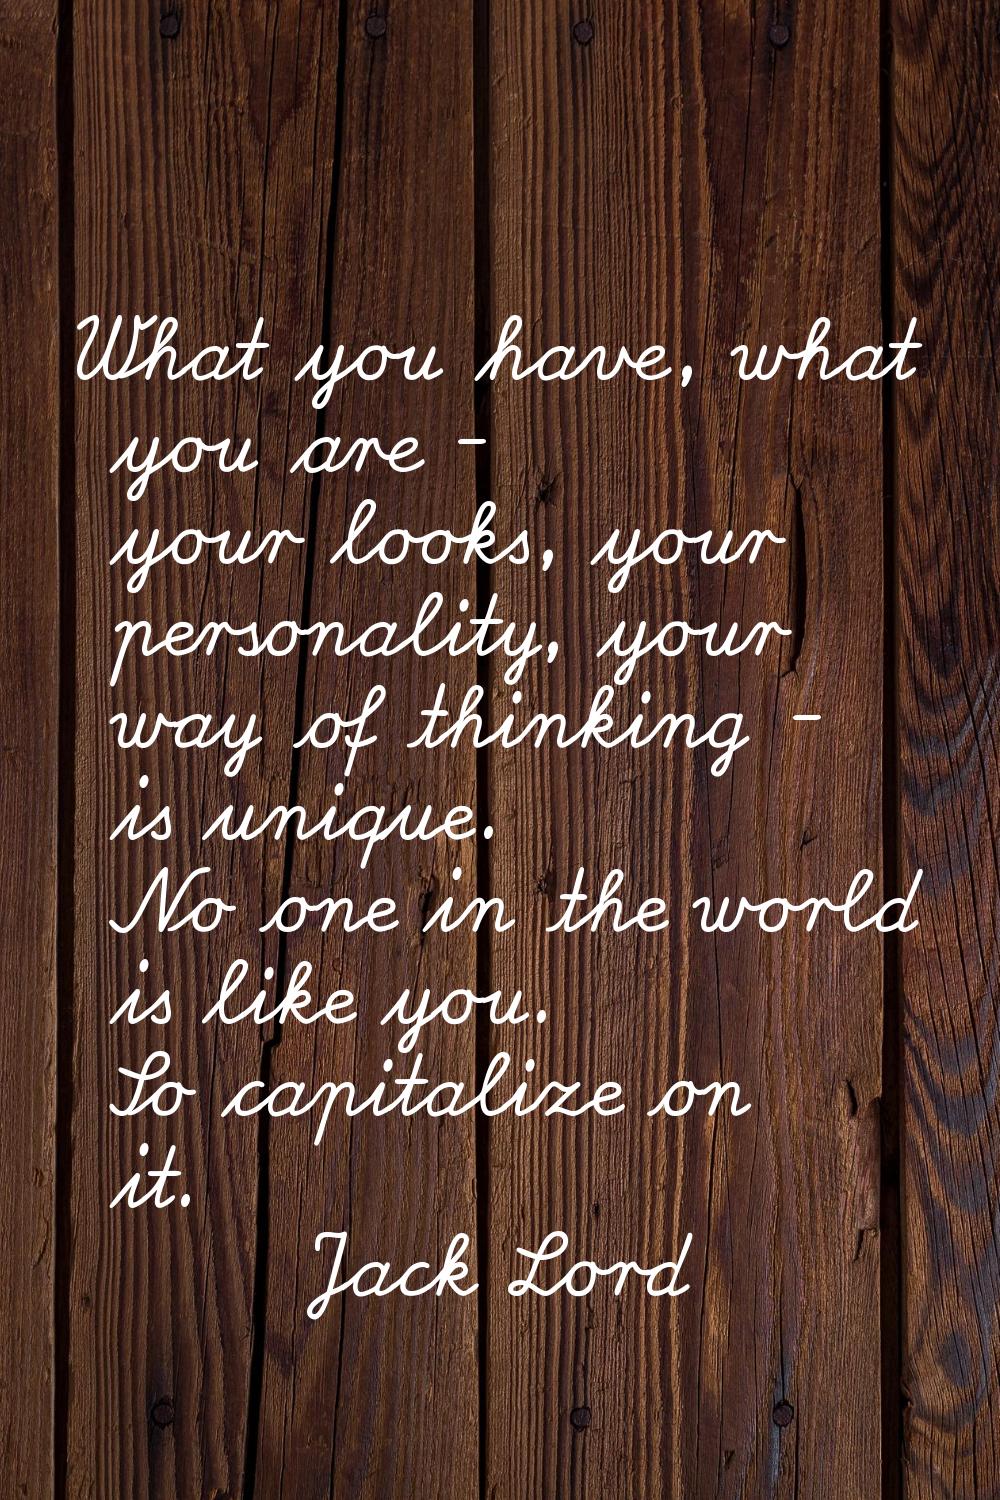 What you have, what you are - your looks, your personality, your way of thinking - is unique. No on